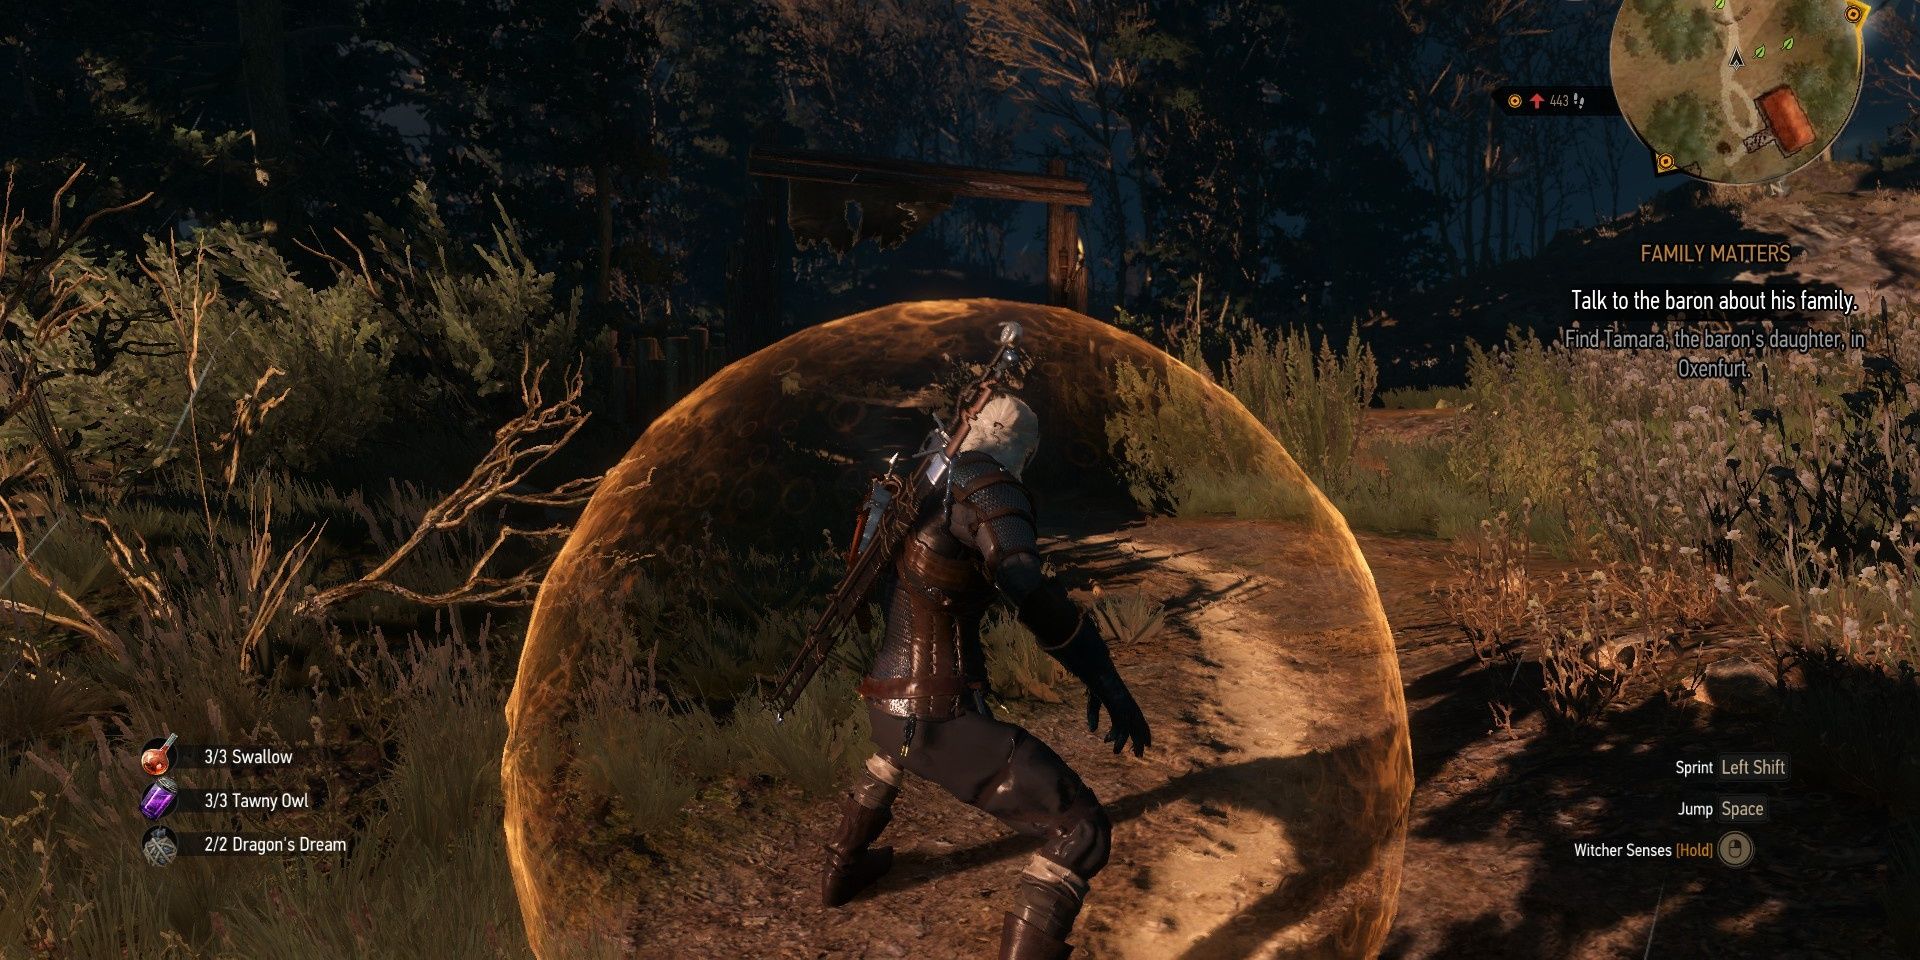 Geralt surrounded by a magical barrier after casting the Quen sign in The Witcher 3.